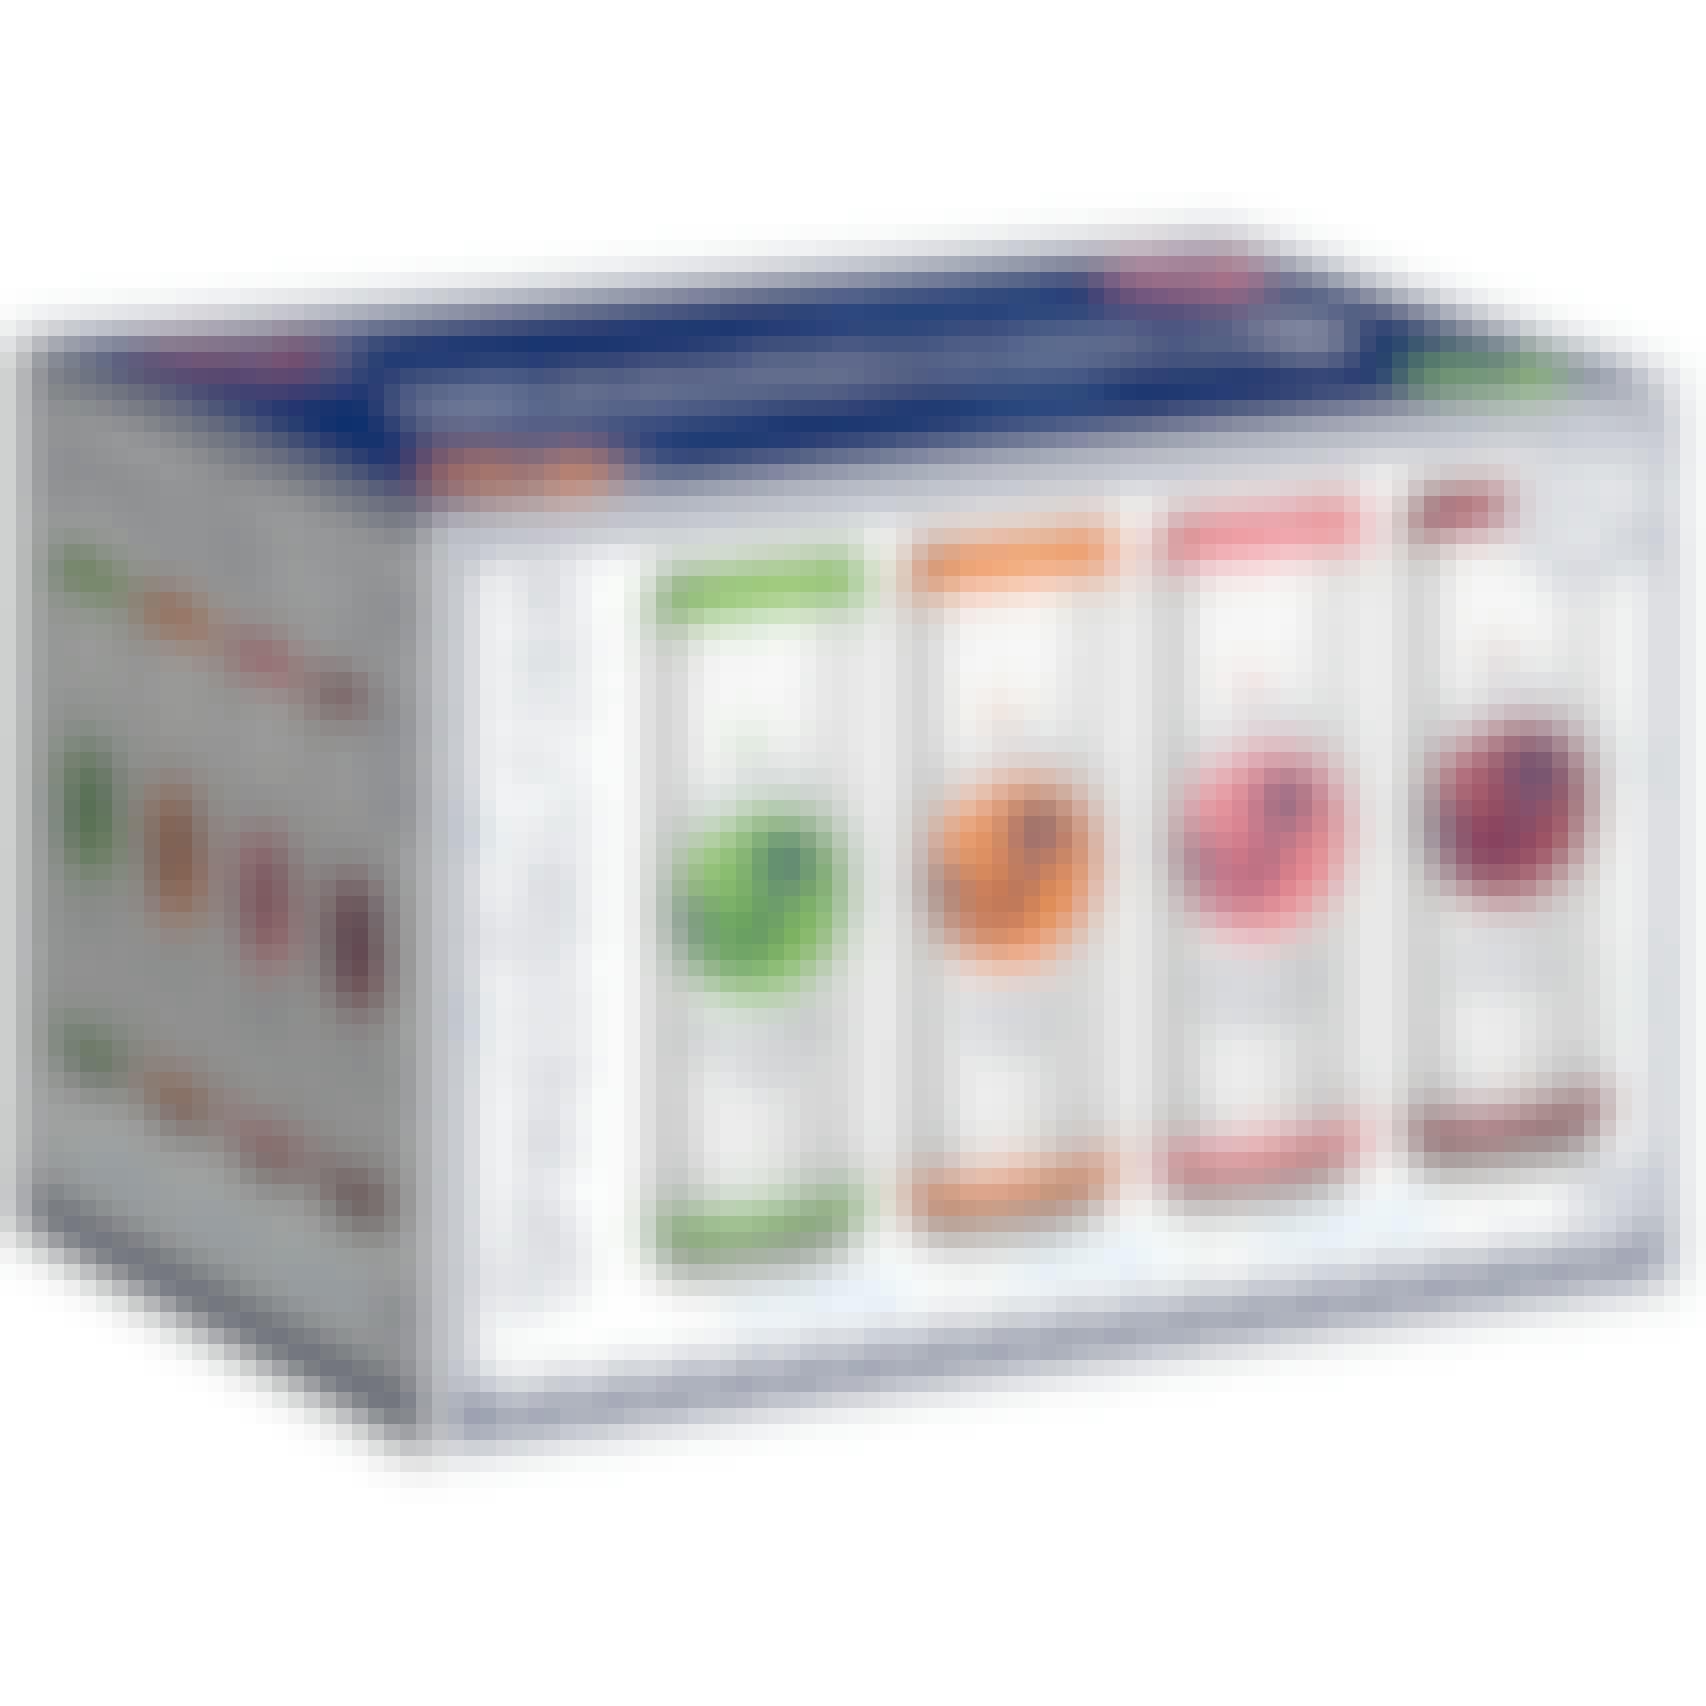 Spiked Seltzer Variety Pack 12 pack 12 oz. Can